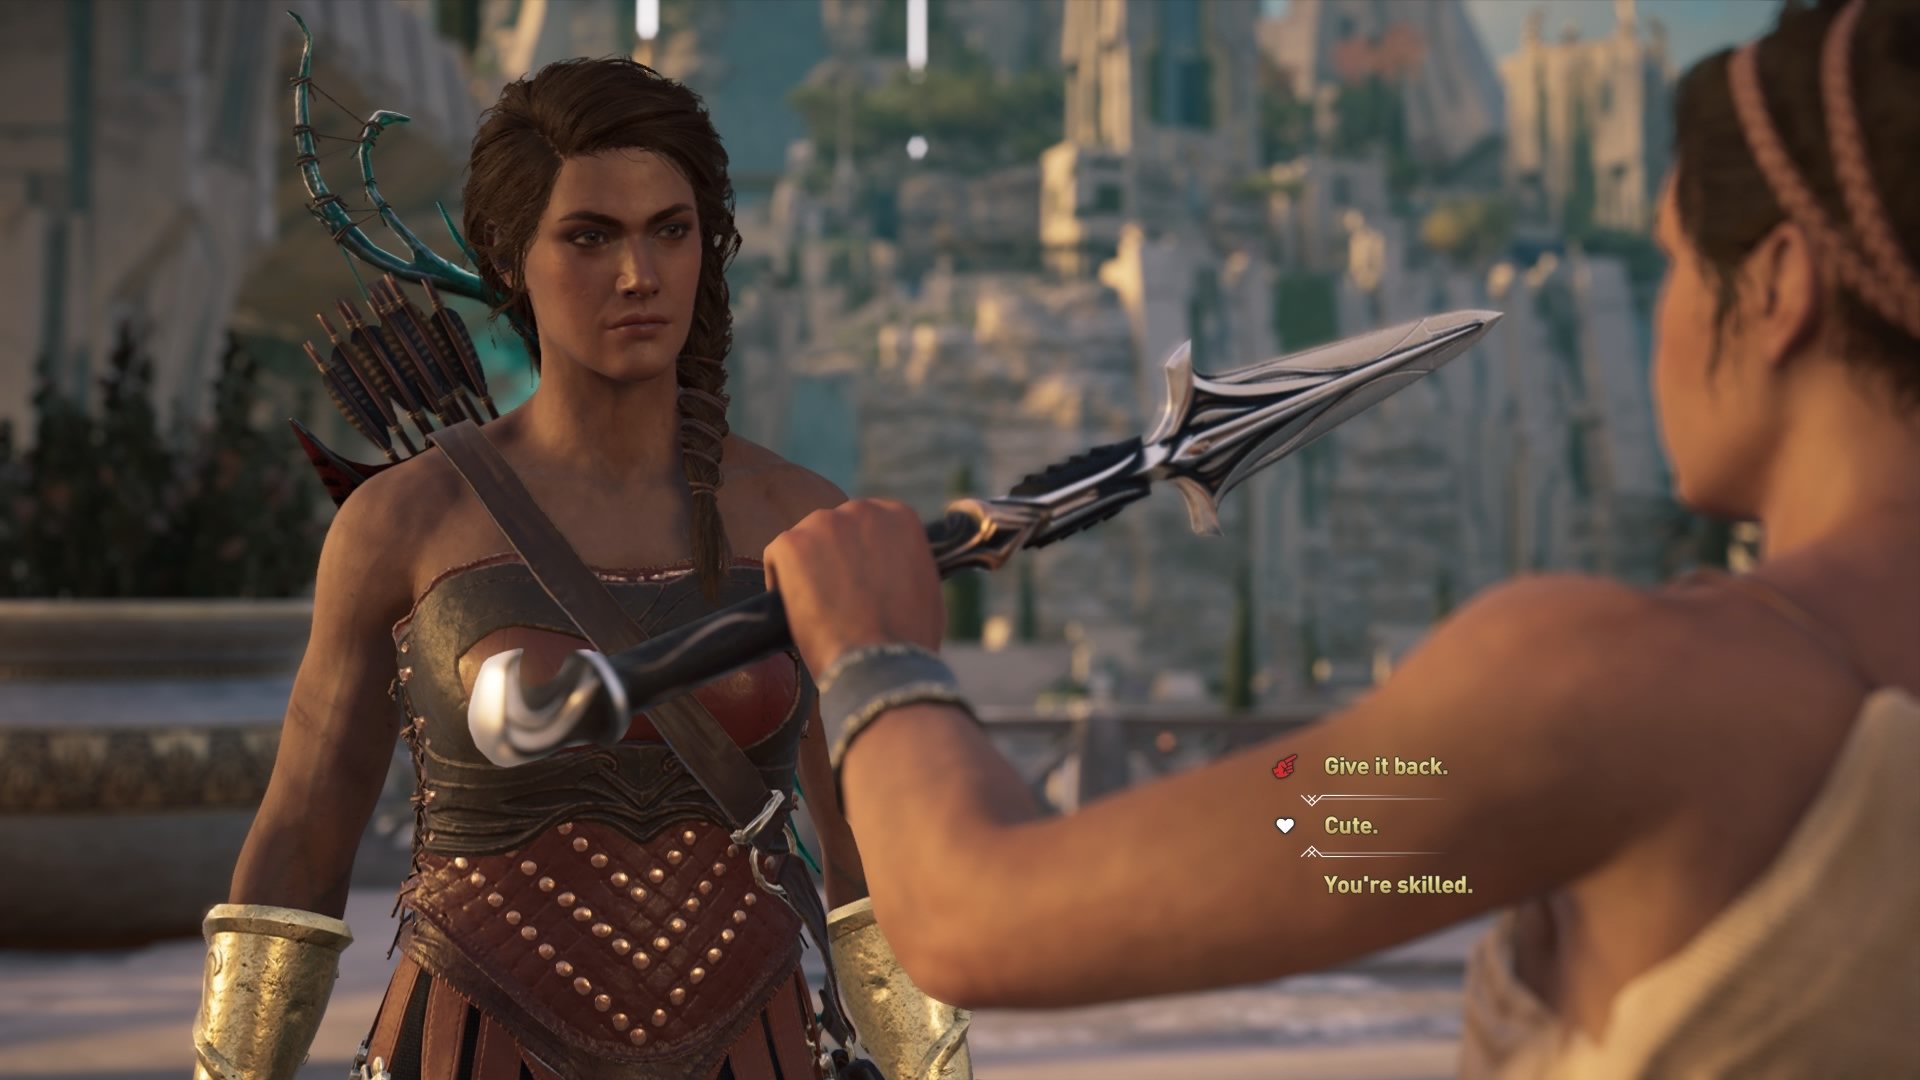 The fate of atlantis. Assassin's Creed Odyssey Атлантида. Ассасин Крид Одиссея Атлантида. Assassin's Creed Odyssey судьба Атлантиды. Ассассинс Крид Одиссея Атлантида.